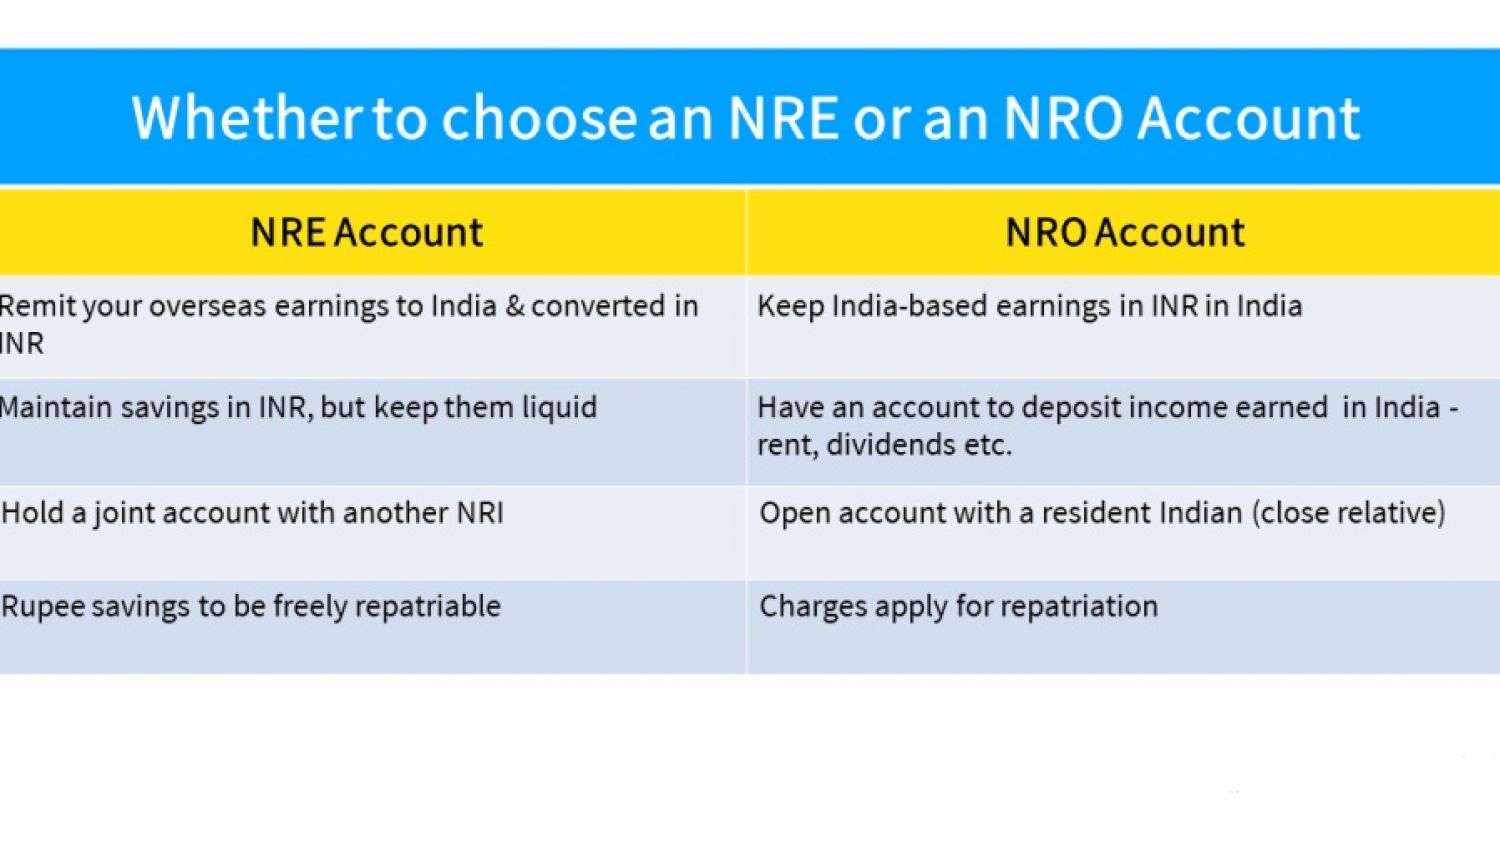 NRE A/c Salary Income Receipt - Not Taxable in the Hand of NRIs Working Abroad